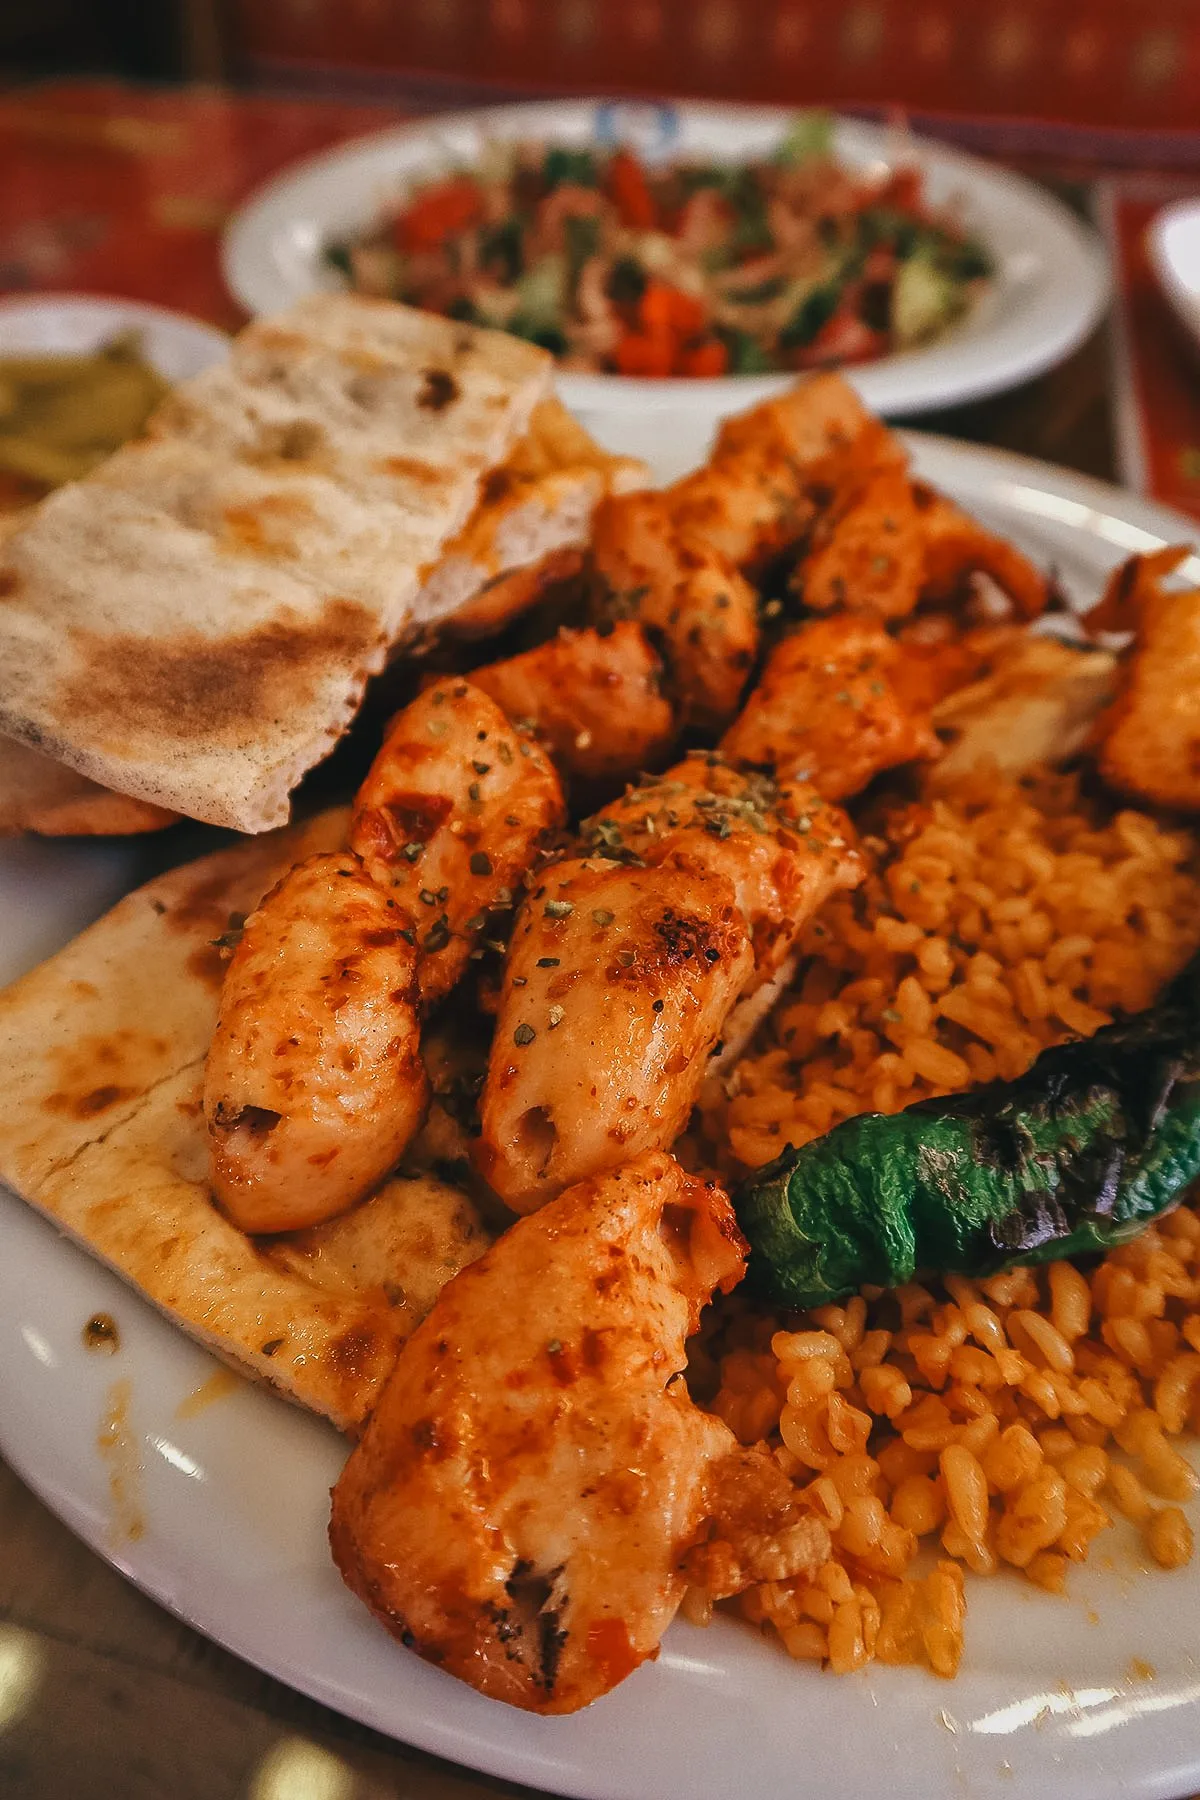 Chicken kebabs at a restaurant in Istanbul